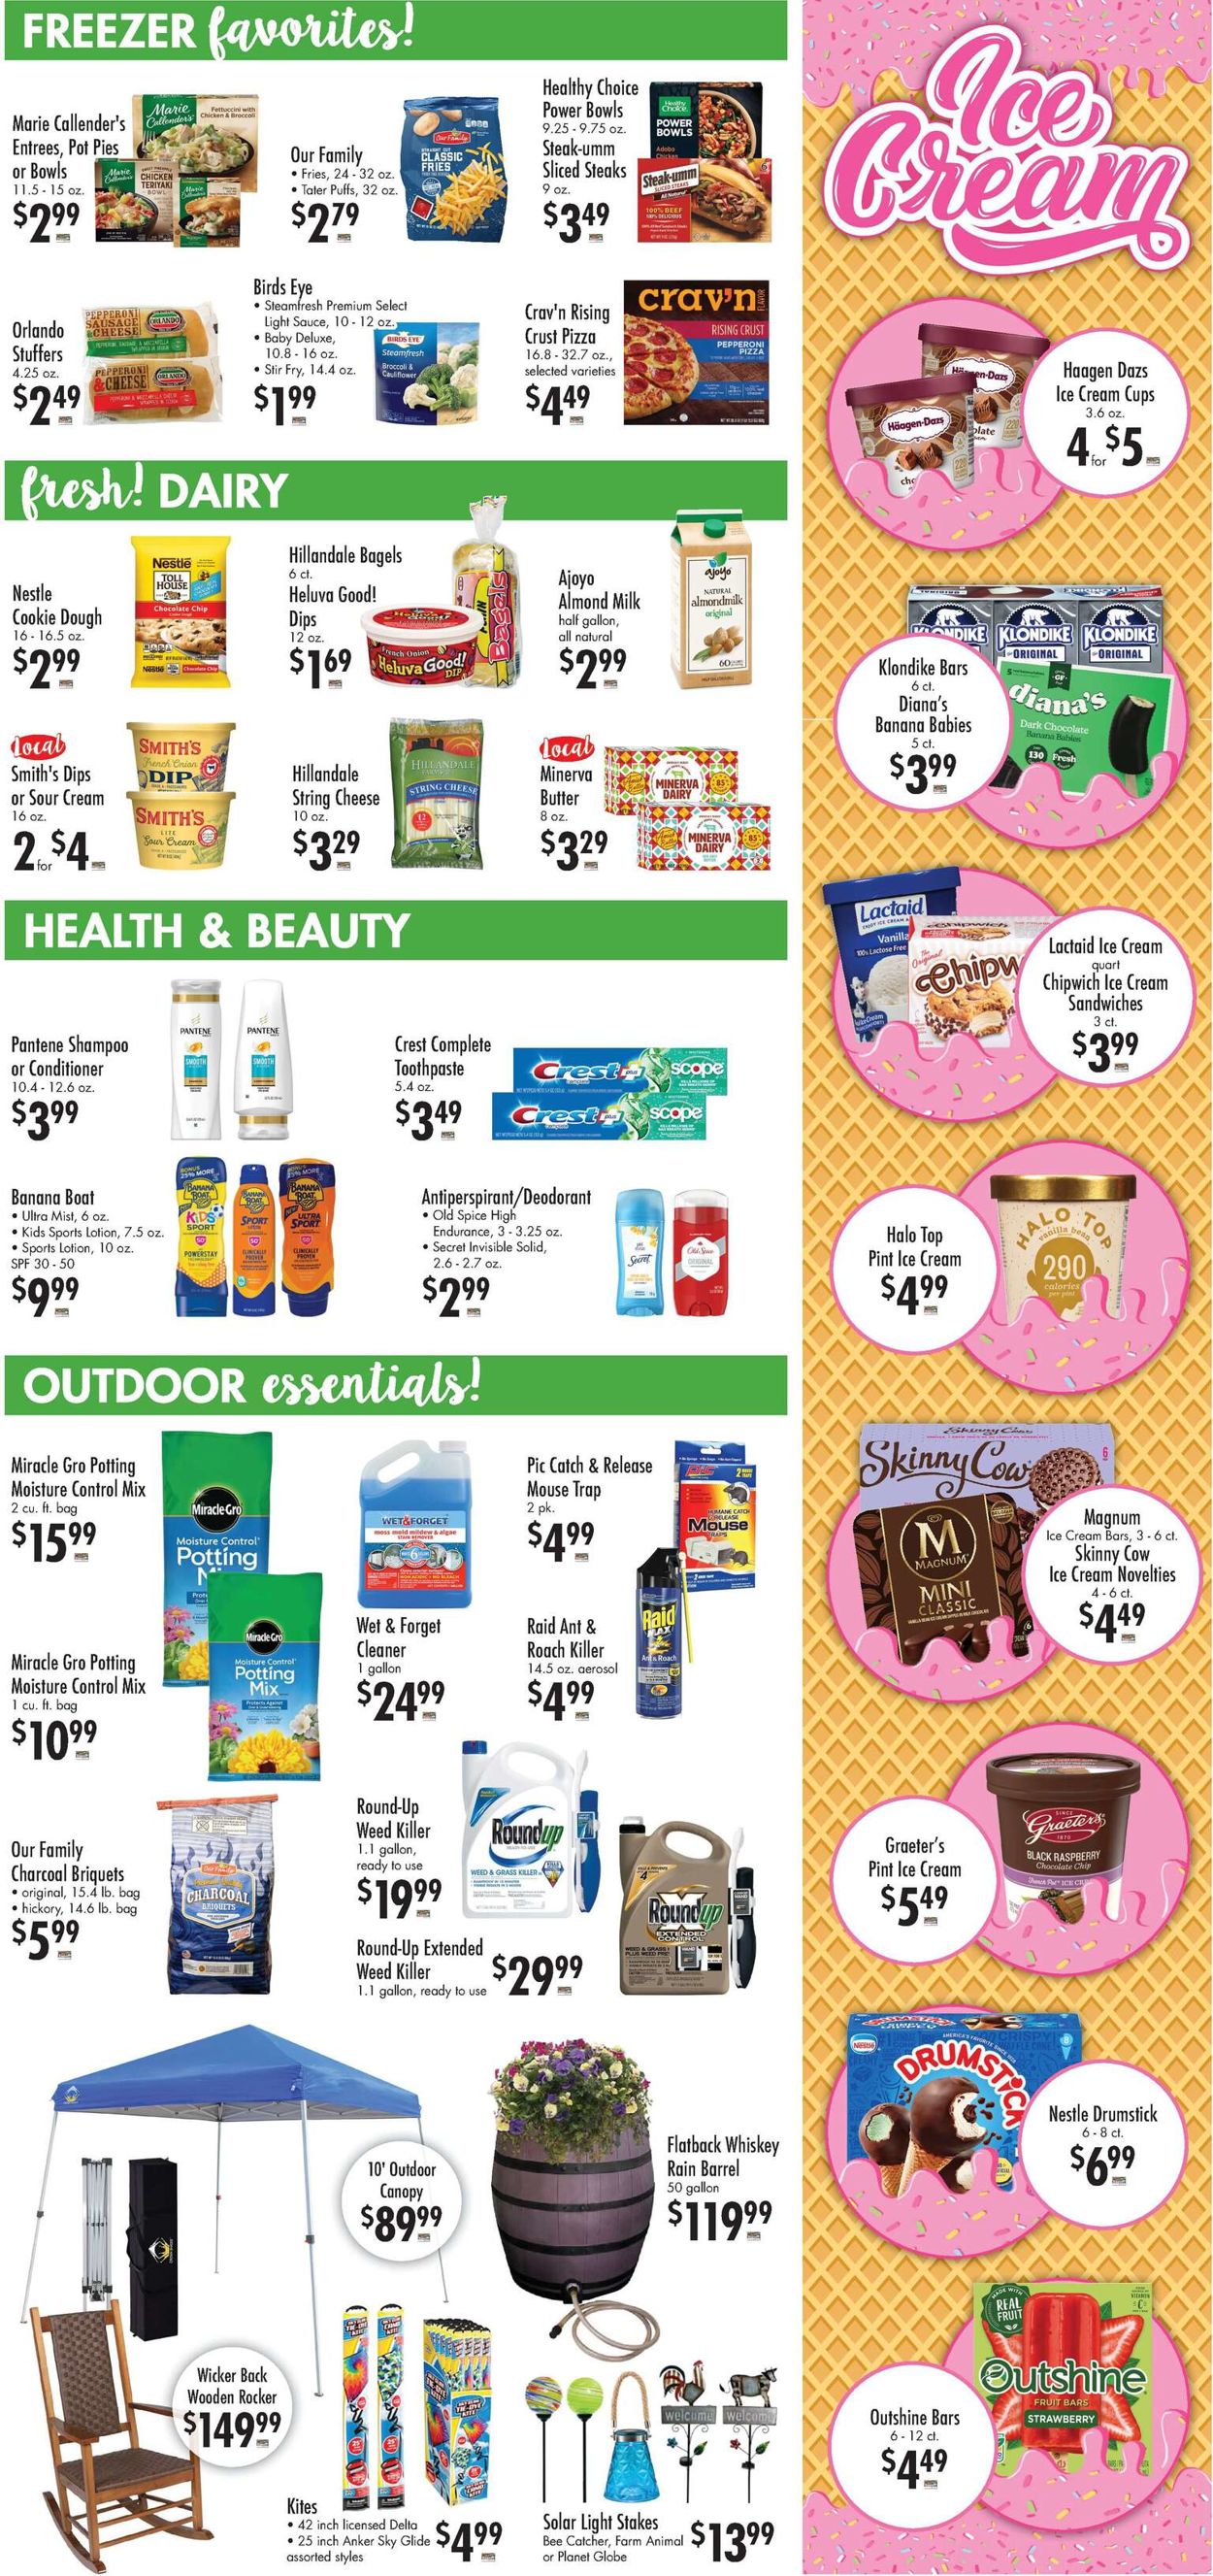 Catalogue Buehler's Fresh Foods from 06/01/2022